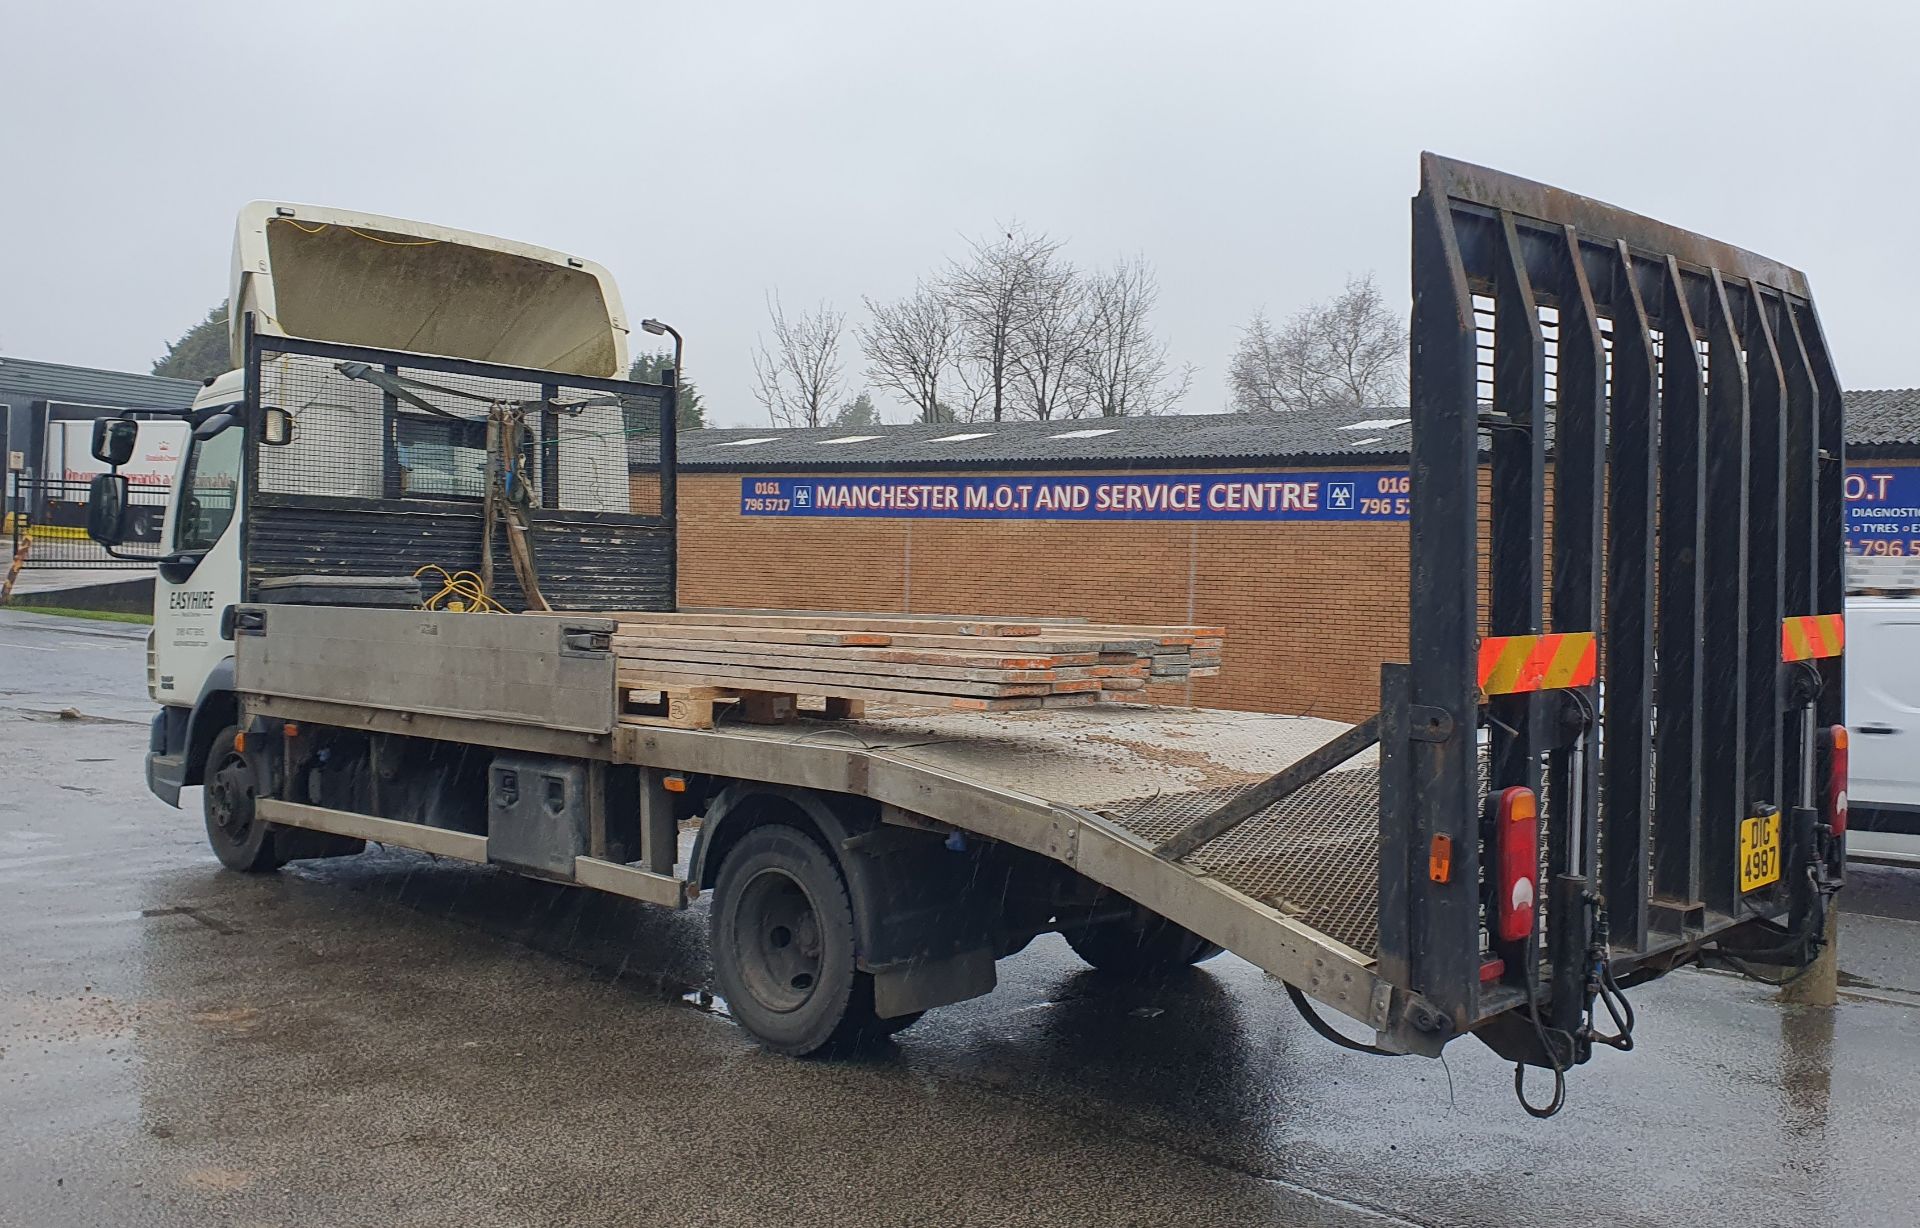 DAF LF 45.160 Flatbed Lorry w/ Loading Ramp & Electric Winch | DIG 4987 | 494,328km - Image 6 of 22